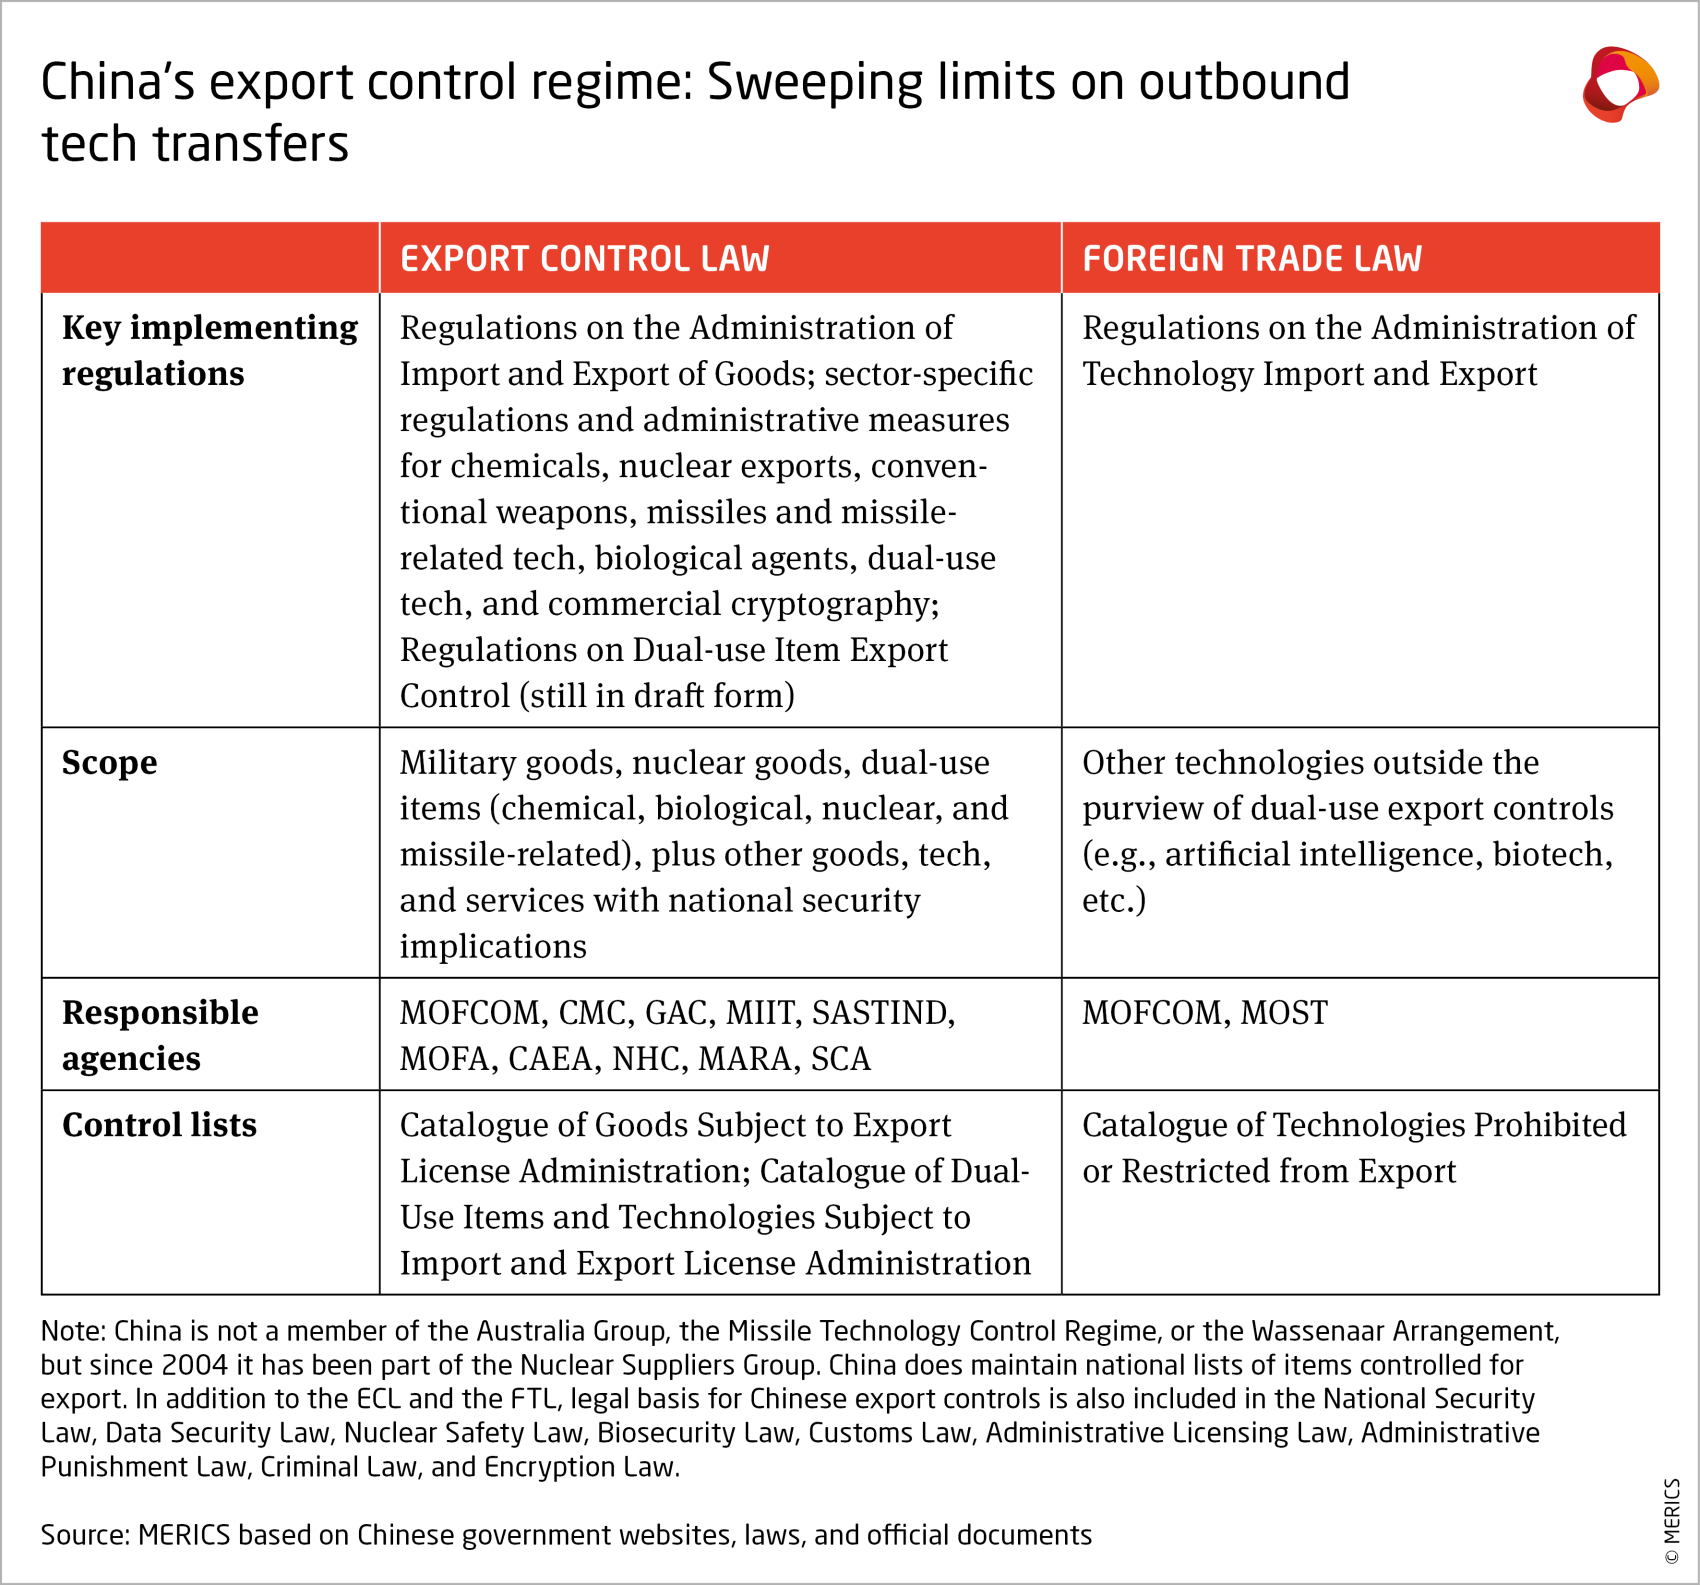 merics-chinas-export-control-regime-sweeping-limits-on-outbound-tech-transfers.png